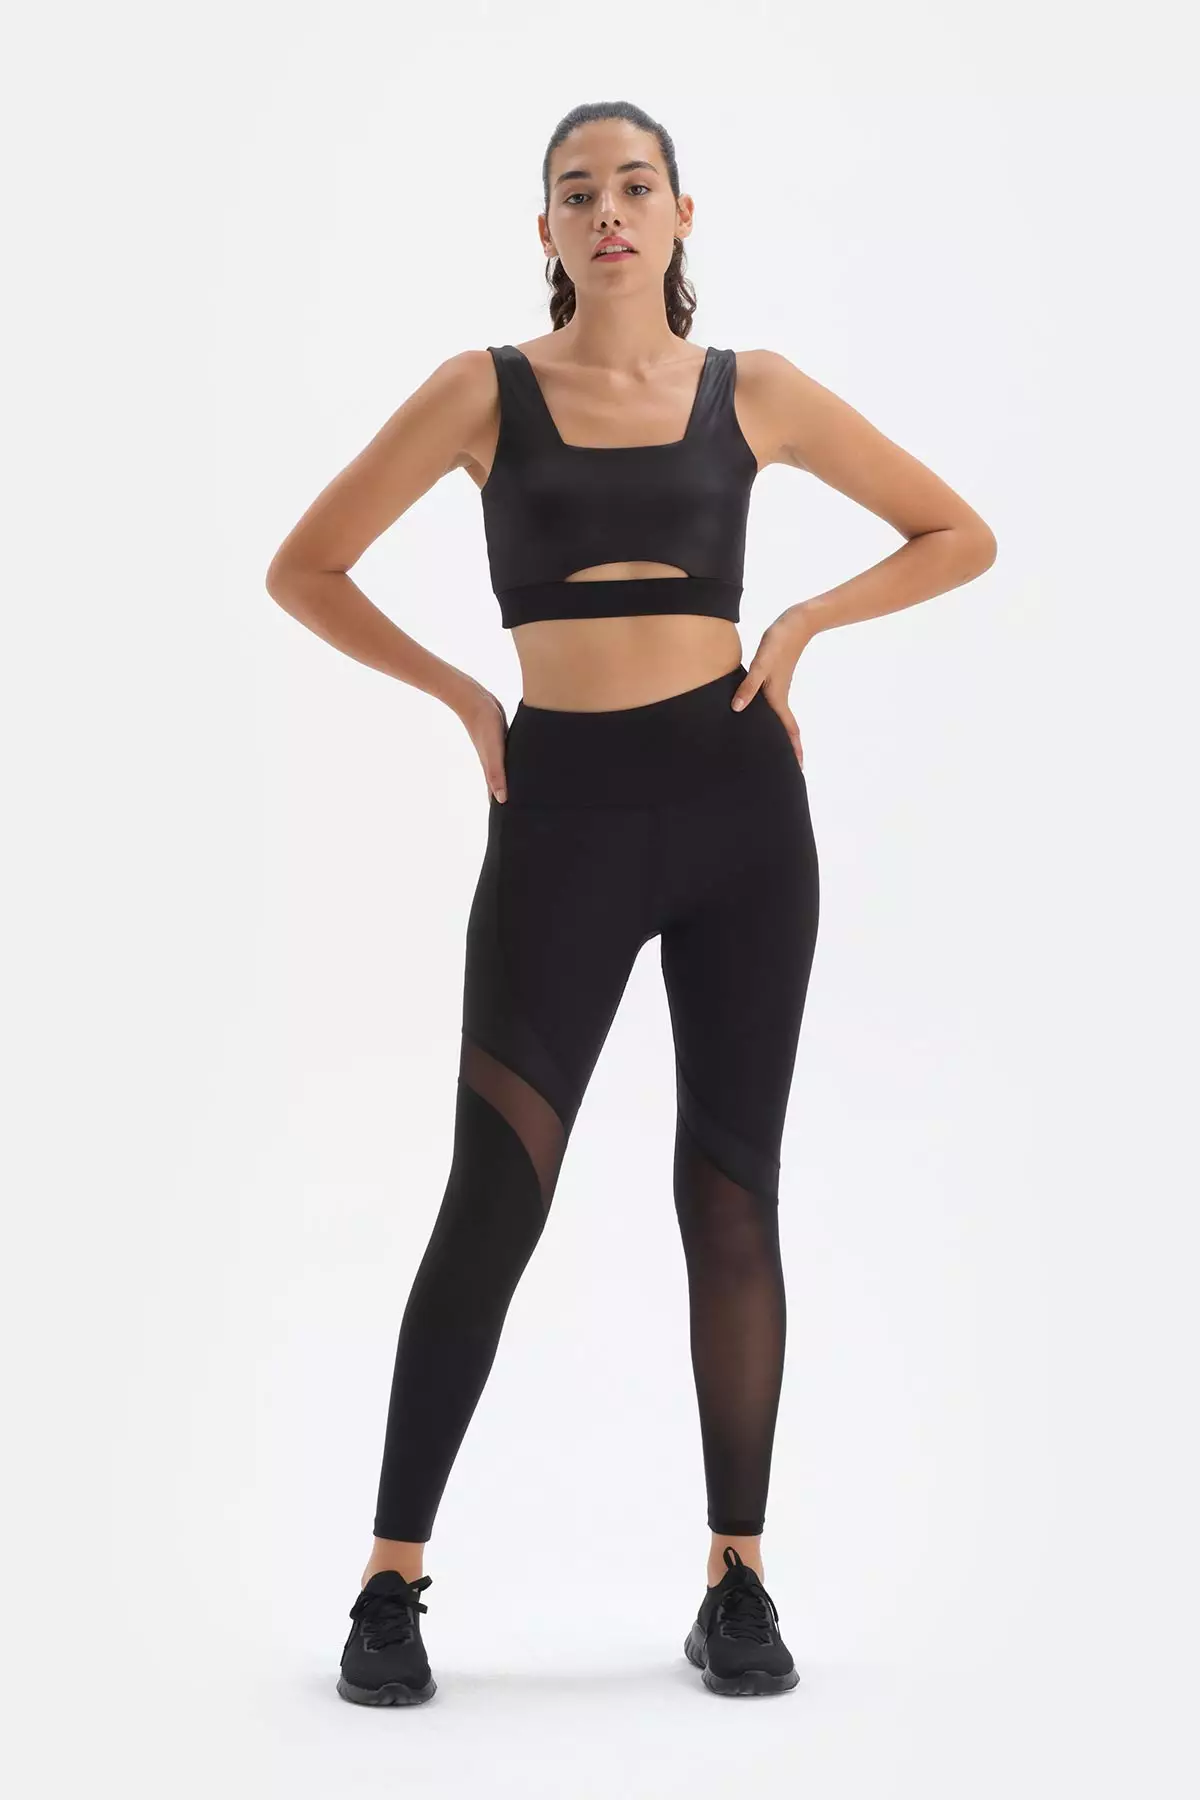 Women's Hollister Activewear from $30